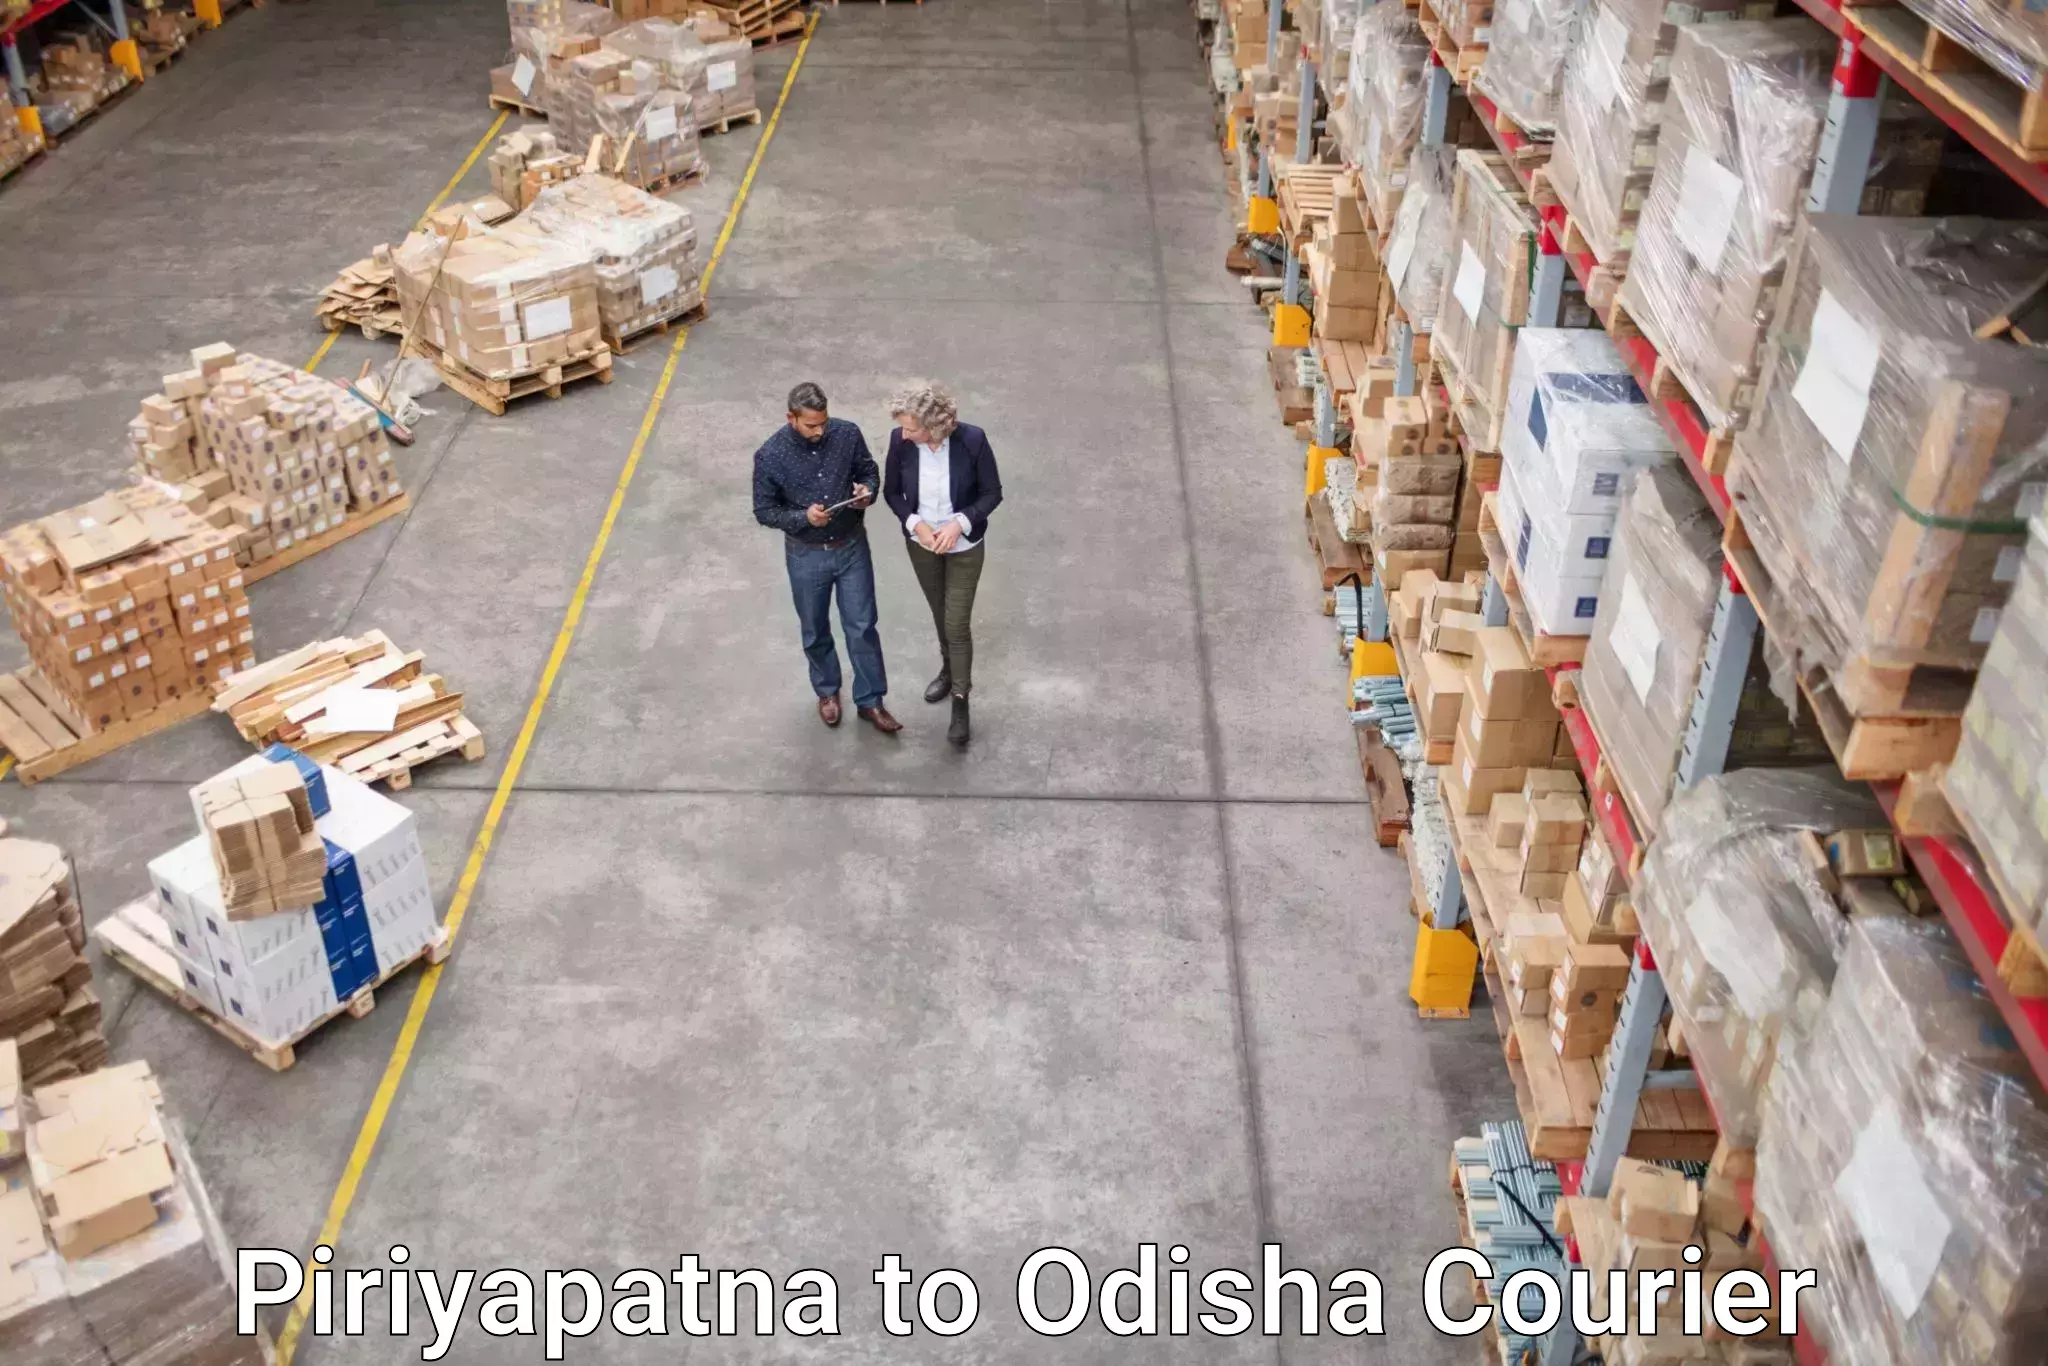 Courier rate comparison in Piriyapatna to Paradip Port